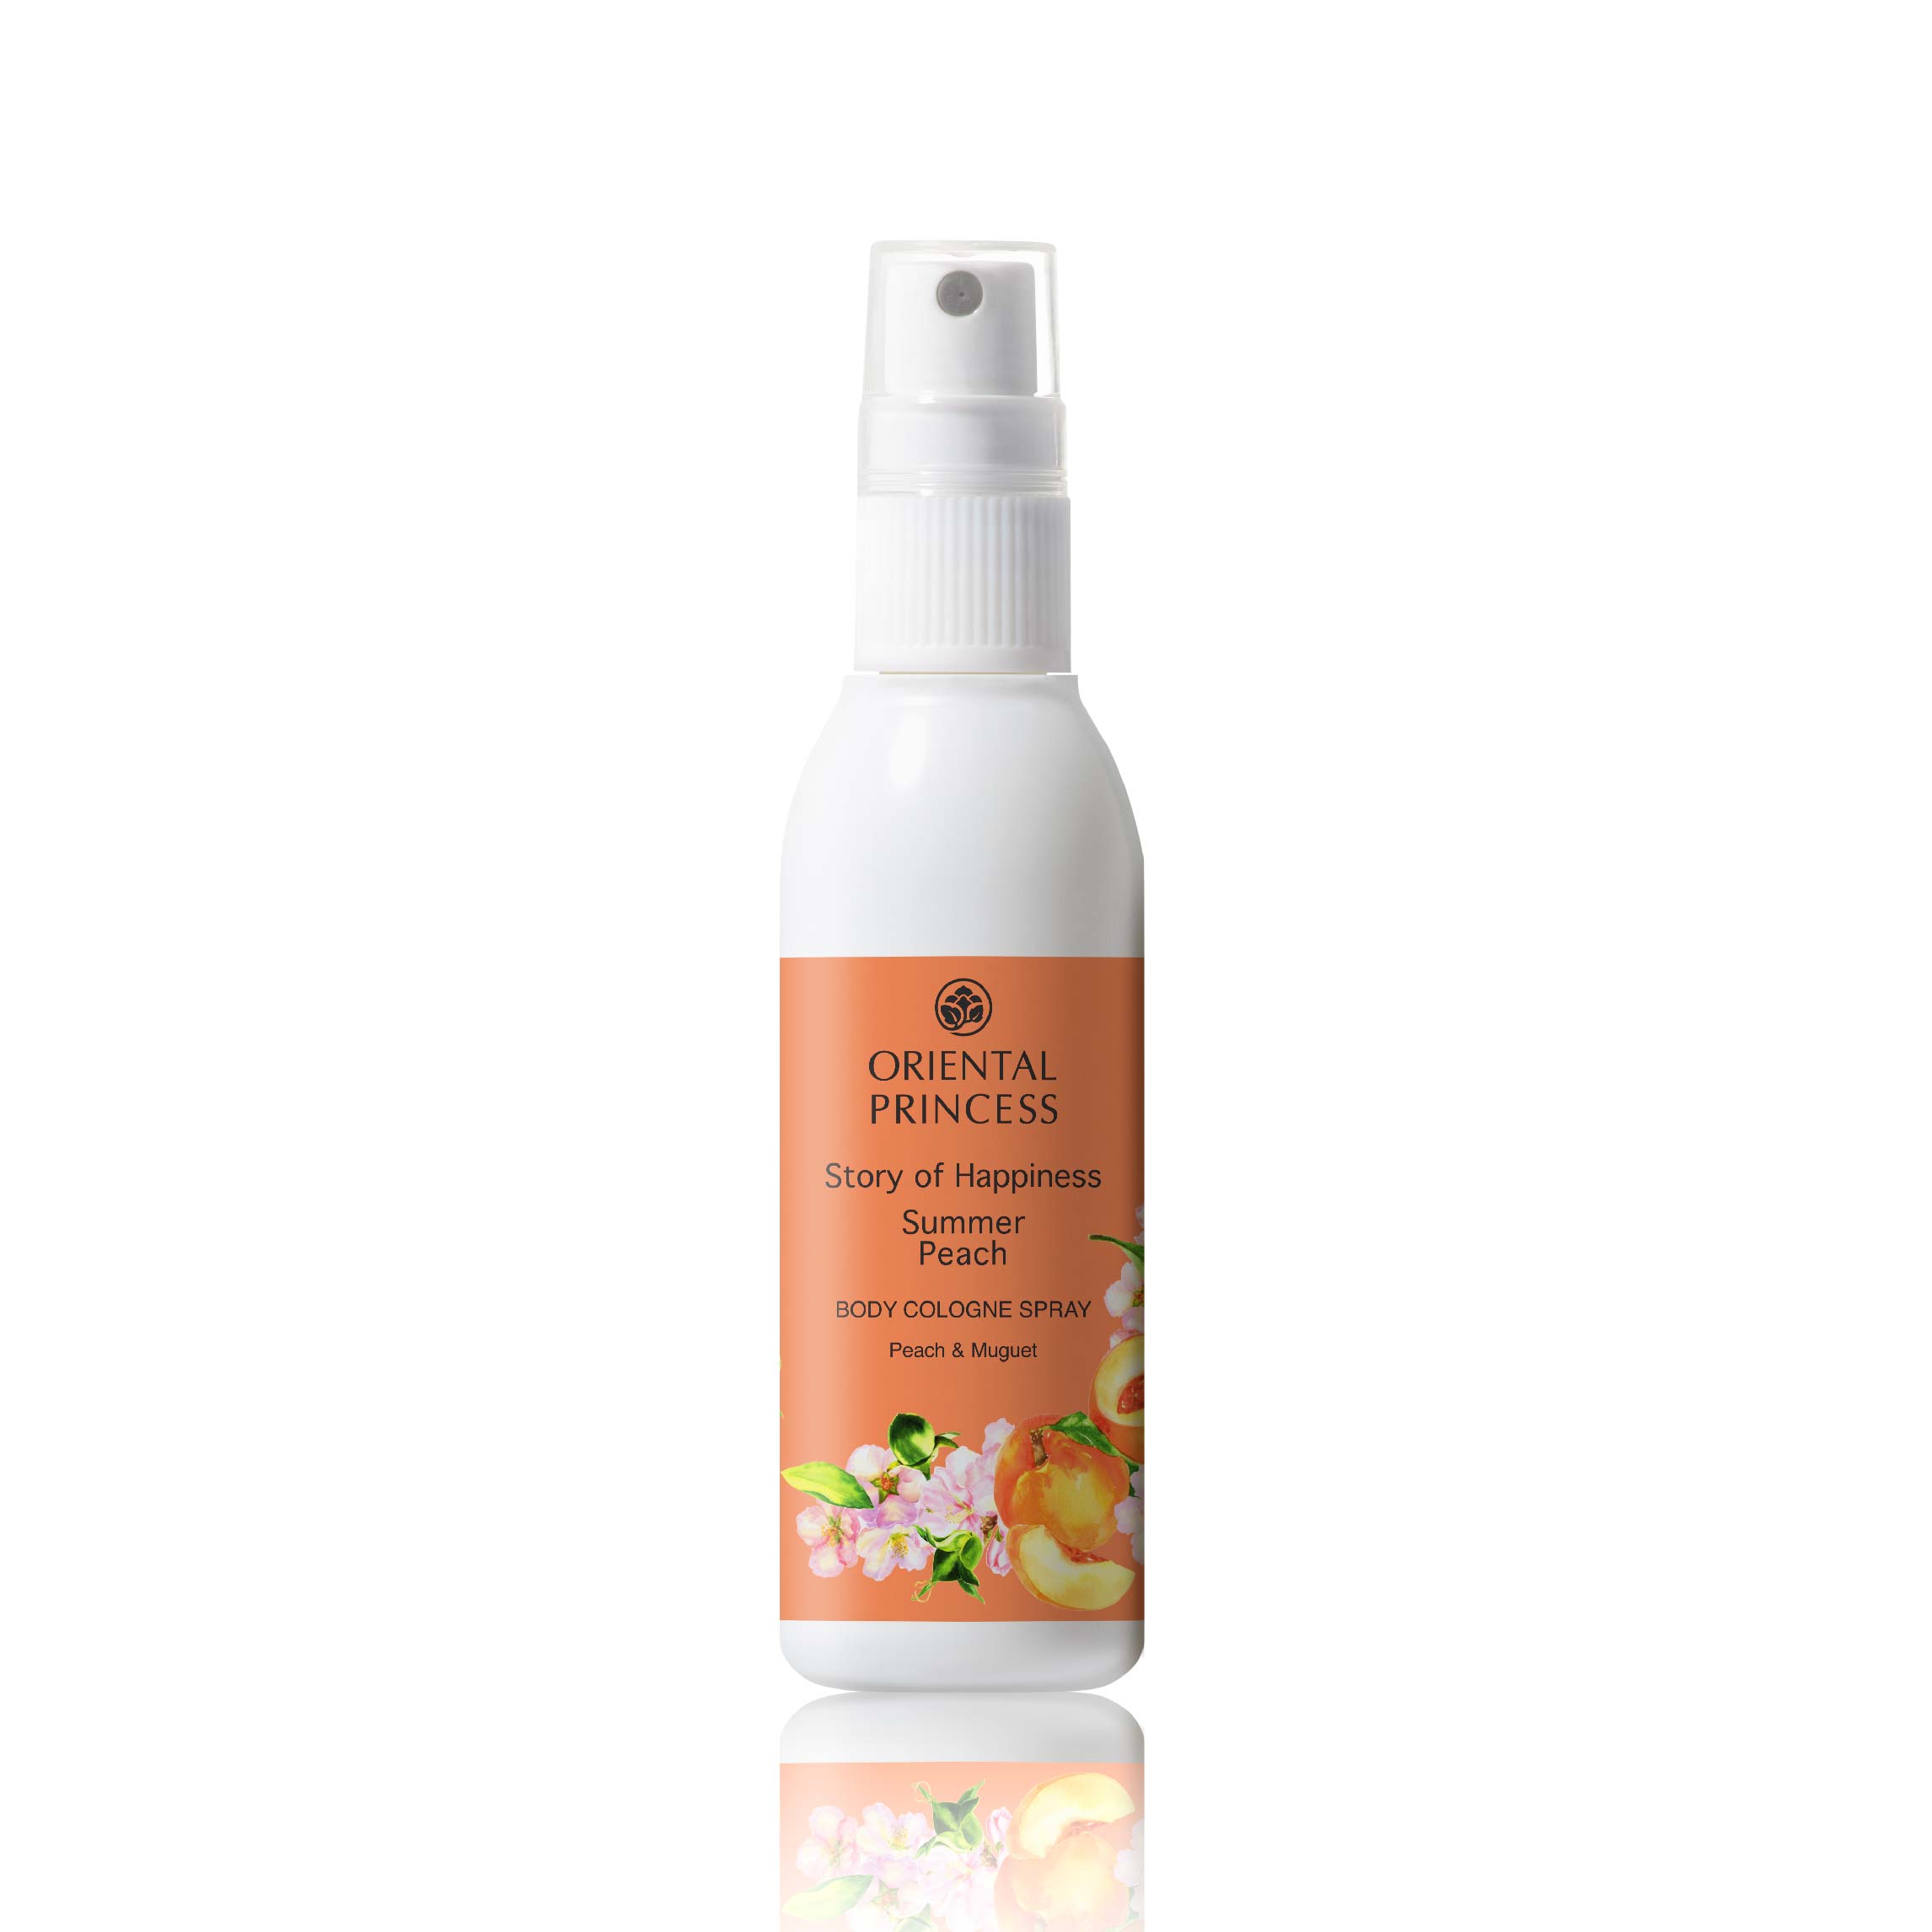 Story of Happiness Summer Peach Body Cologne Spray